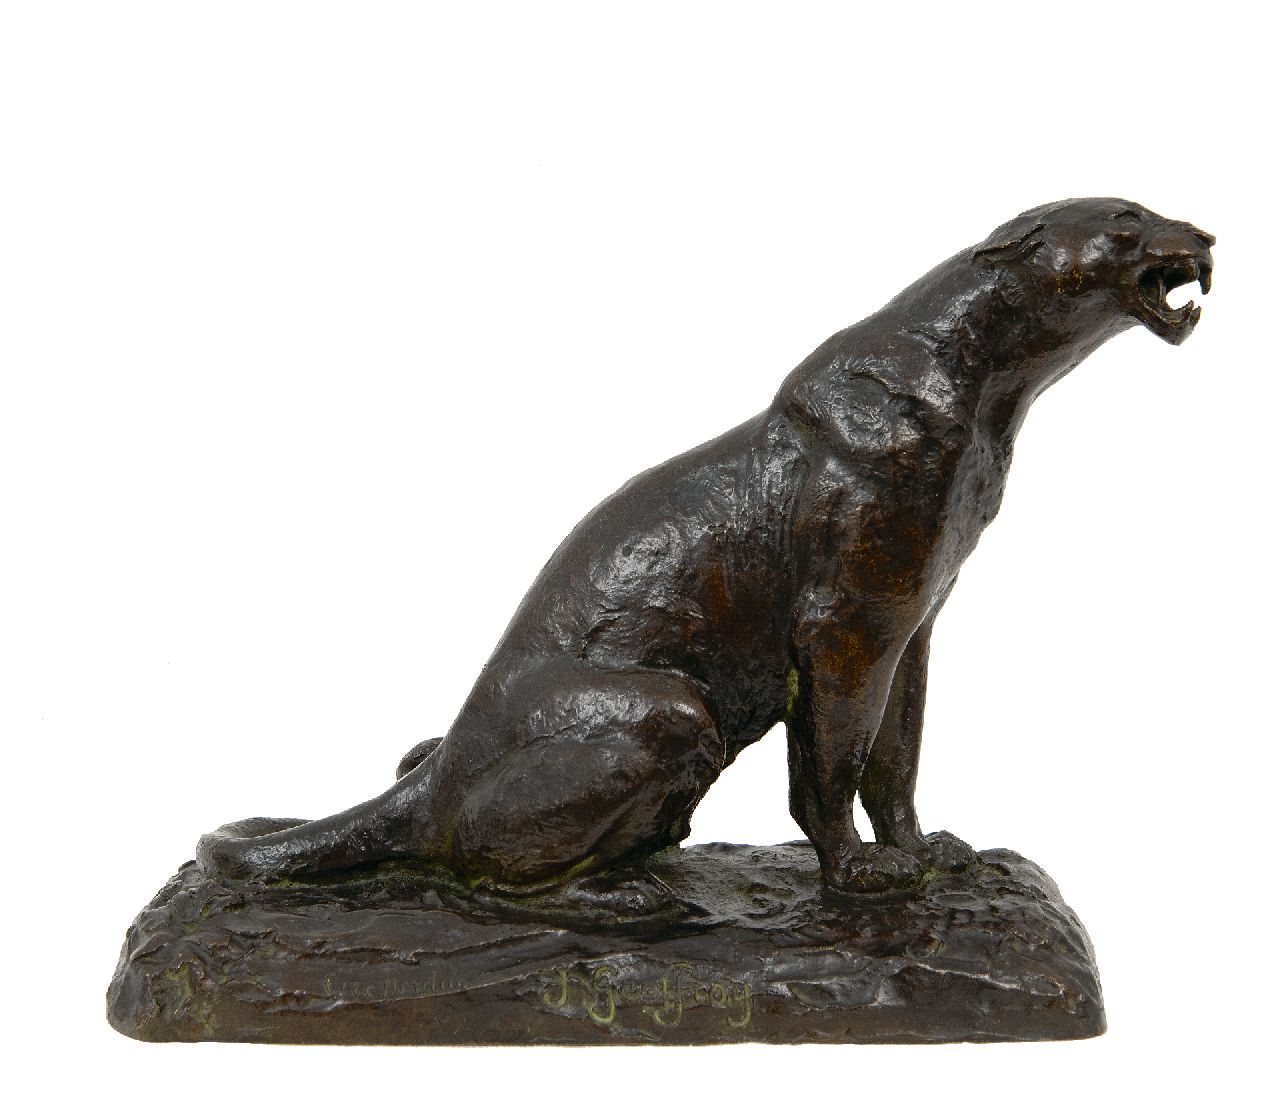 Geoffroy A.L.V.  | Adolphe Louis Victor Geoffroy | Sculptures and objects offered for sale | Roaring panter, bronze 19.7 x 25.0 cm, signed on the base